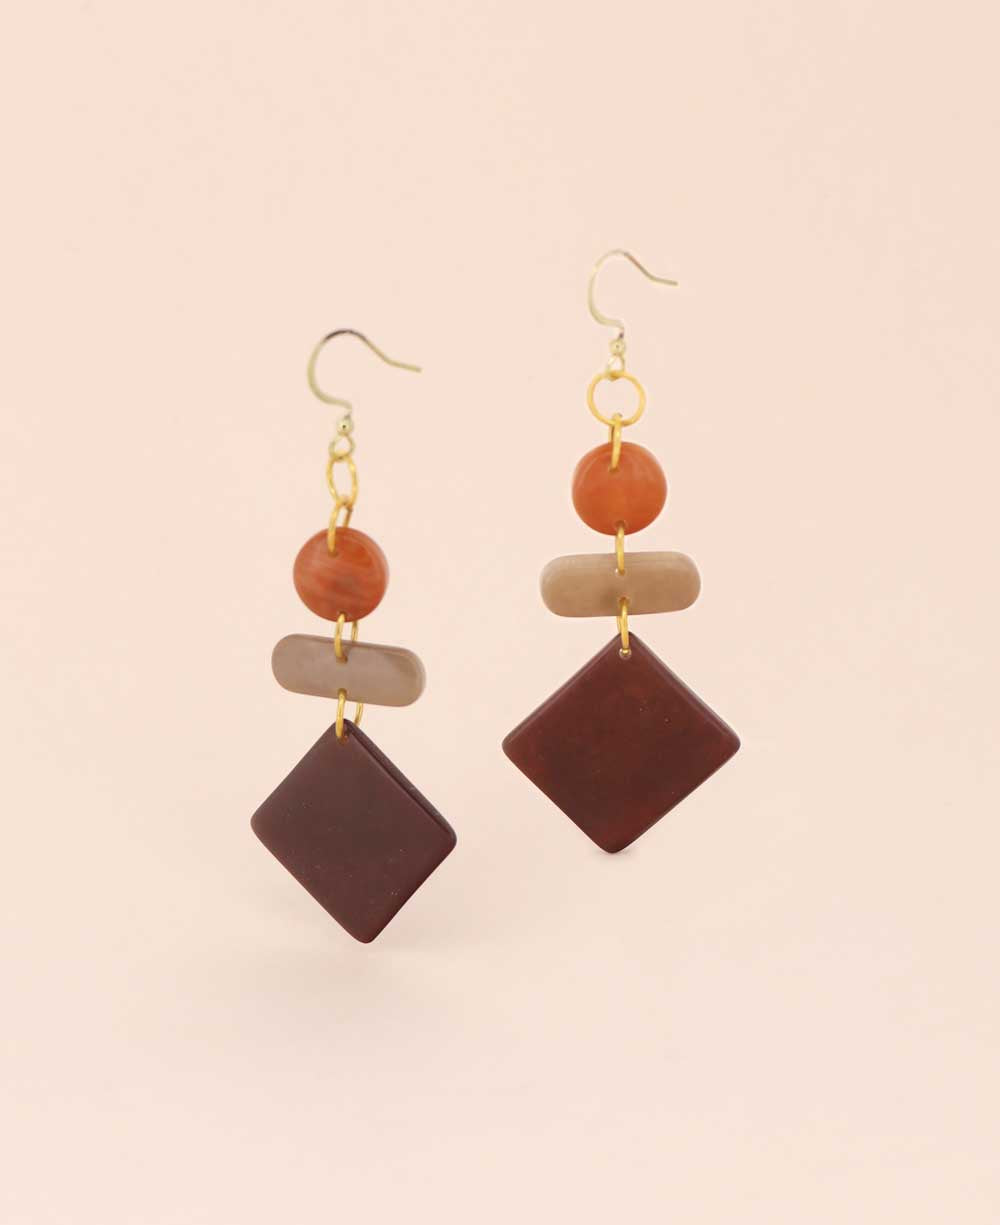 Hanging Tagua Seed Earrings with Fish Hook